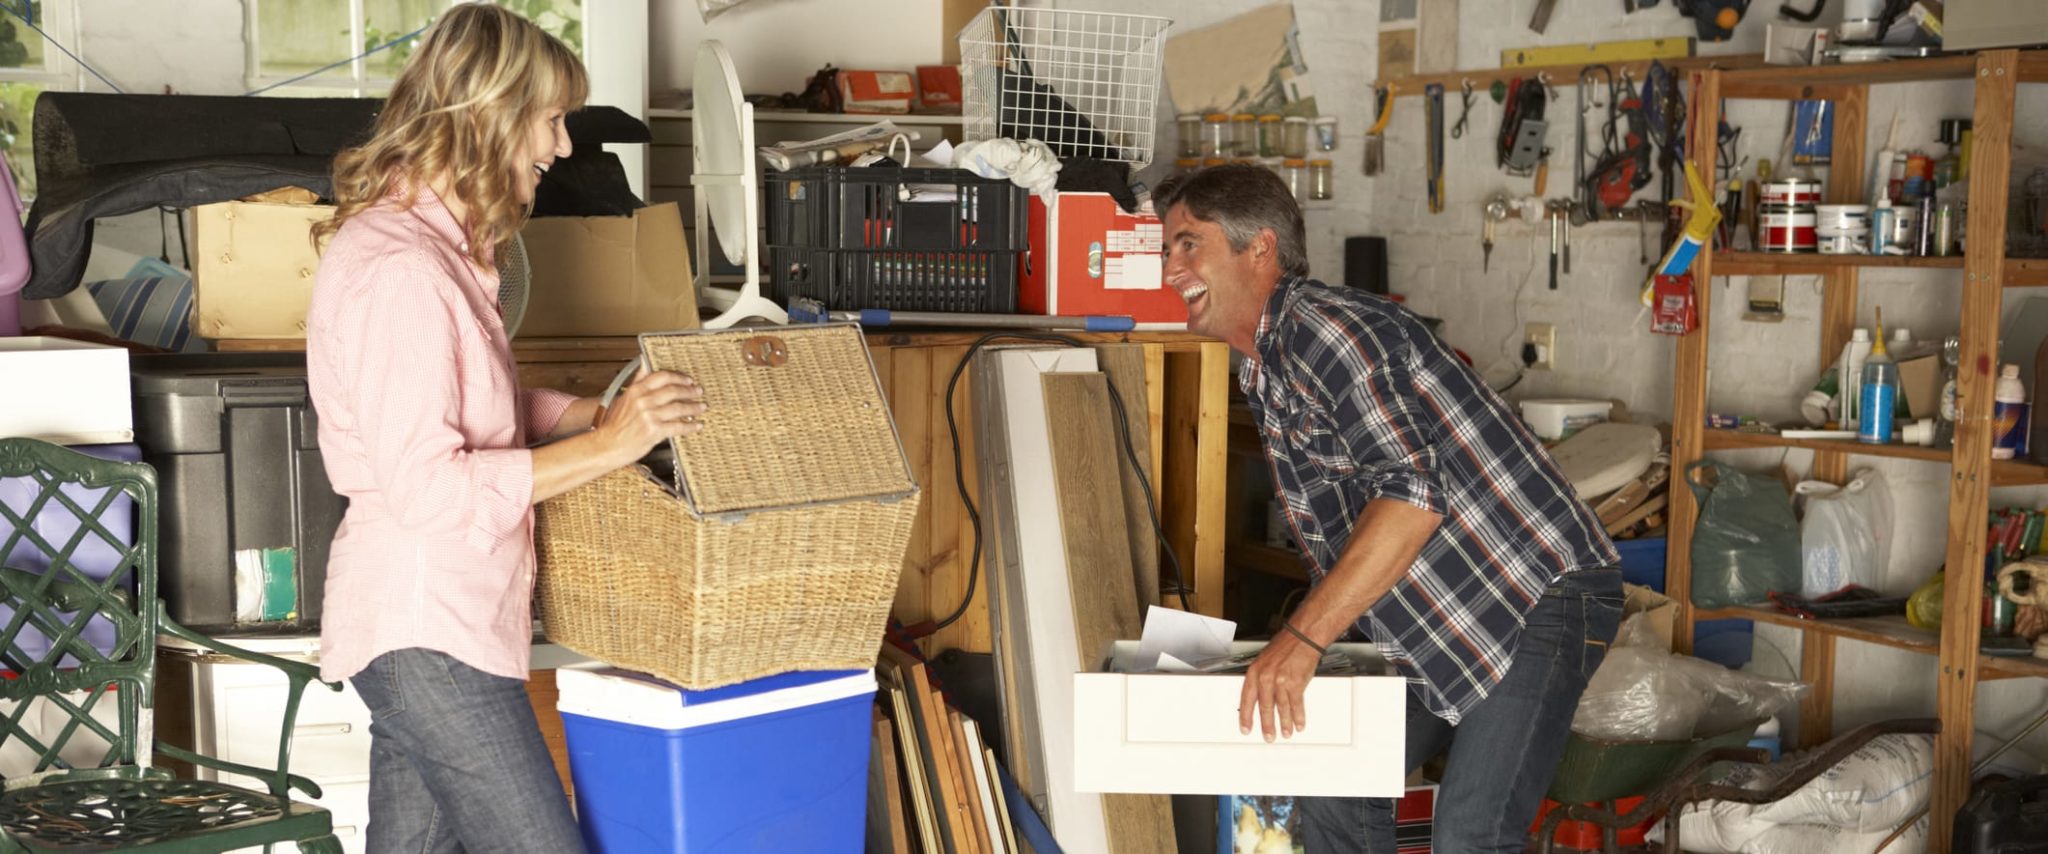 Happy man and woman storing items in garage